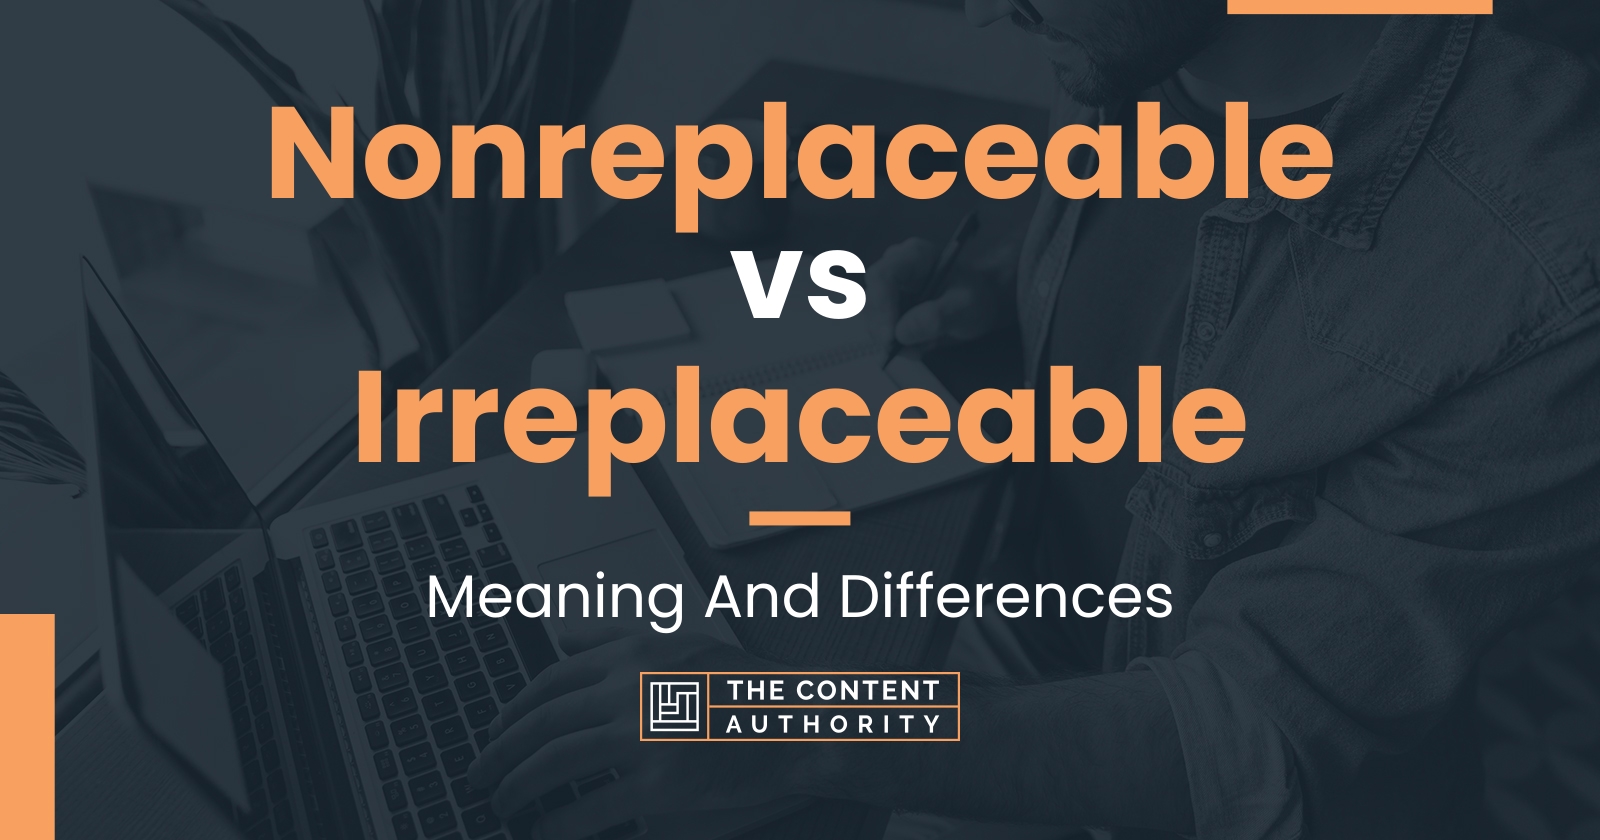 Nonreplaceable vs Irreplaceable: Meaning And Differences